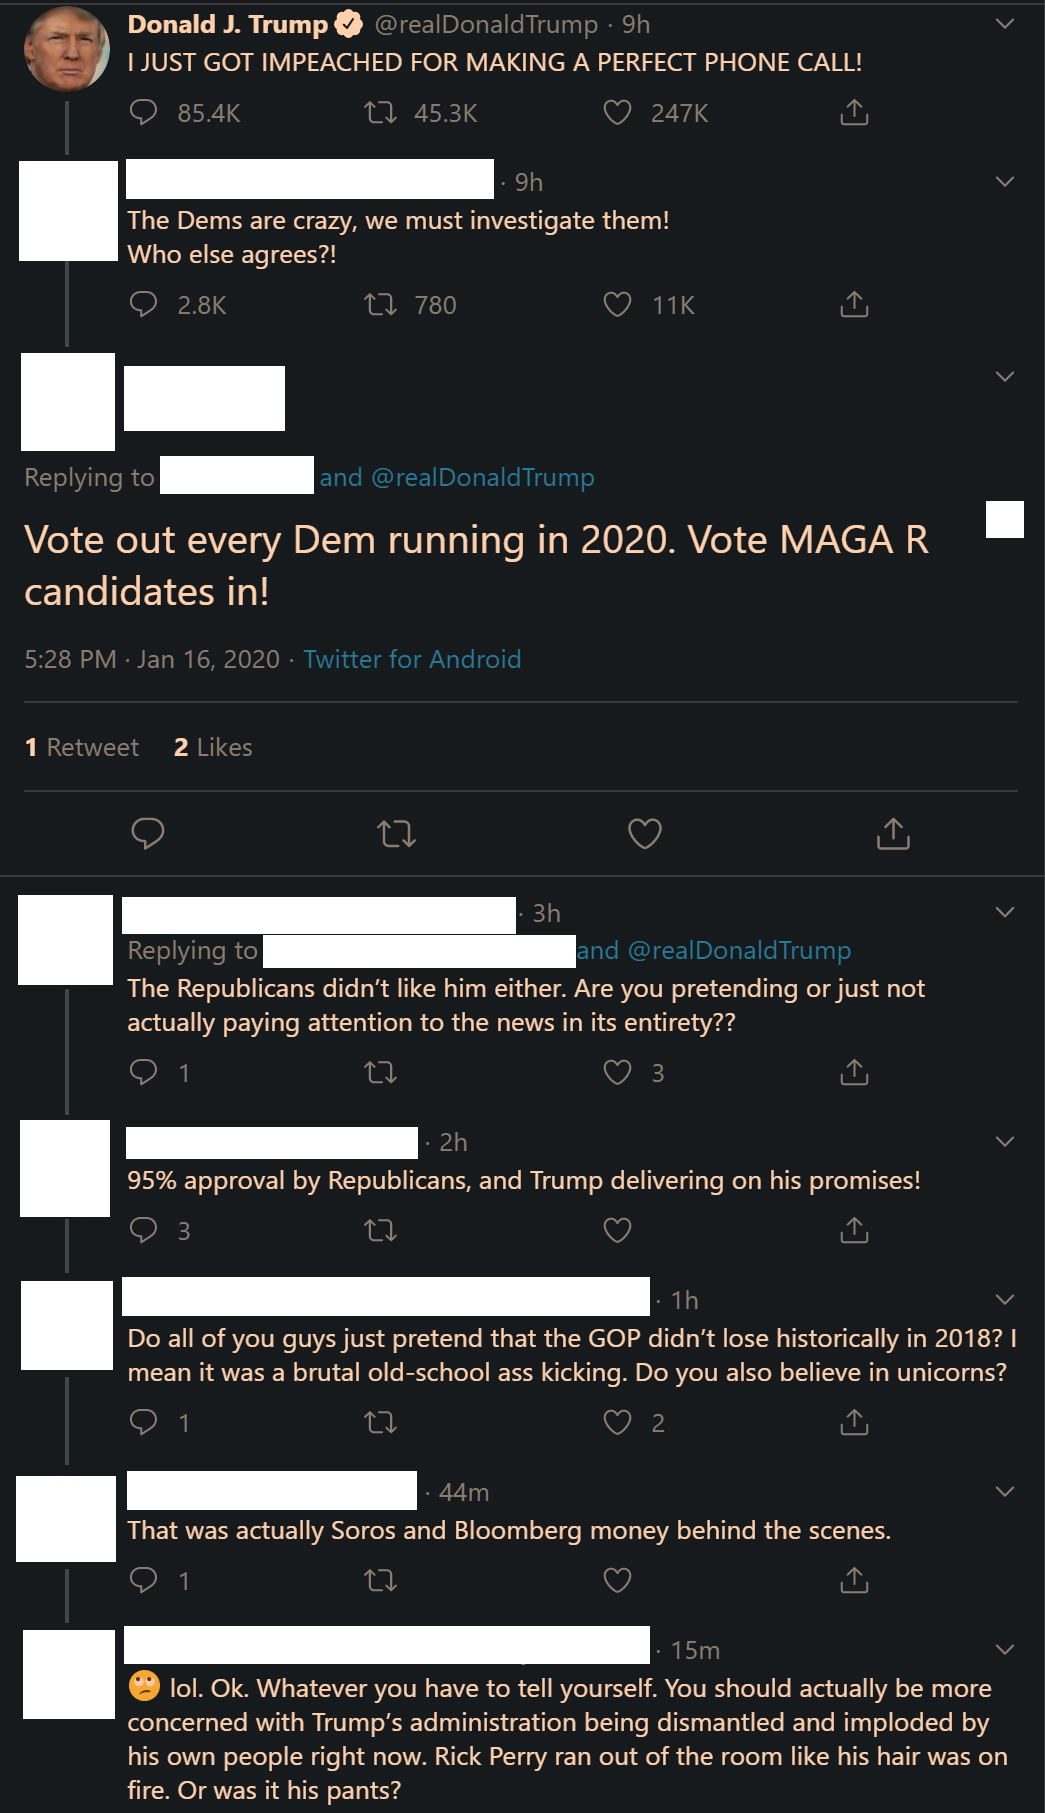 Image from Twitter: Donald J. Trump: '“'I JUST GOT IMPEACHED FOR MAKING A PERFECT PHONE CALL!' Subject 1: 'The Dems are crazy, we must investigate them! Who else agrees?!' Subject 2: 'Vote out every Dem running in 2020. Vote MAGA R candidates in!' Subject 3: 'The Republicans didn’t like him either. Are you pretending or just not actually paying attention to the news in its entirety??' Subject 2: '95% approval by Republicans, and Trump delivering on his promises!' Subject 3: 'Do all of you guys just pretend that the GOP didn’t lose historically in 2018? I mean it was a brutal old-school ass kicking. Do you also believe in unicorns?' Subject 2: 'That was actually Soros and Bloomberg money behind the scenes.' Subject 3: '(rolling eyes emoji) lol. Ok. Whatever you have to tell yourself. You should actually be more concerned with Trump’s administration being dismantled and imploded by his own people right now. Rick Perry ran out of the room like his hair was on fire. Or was it his pants?'